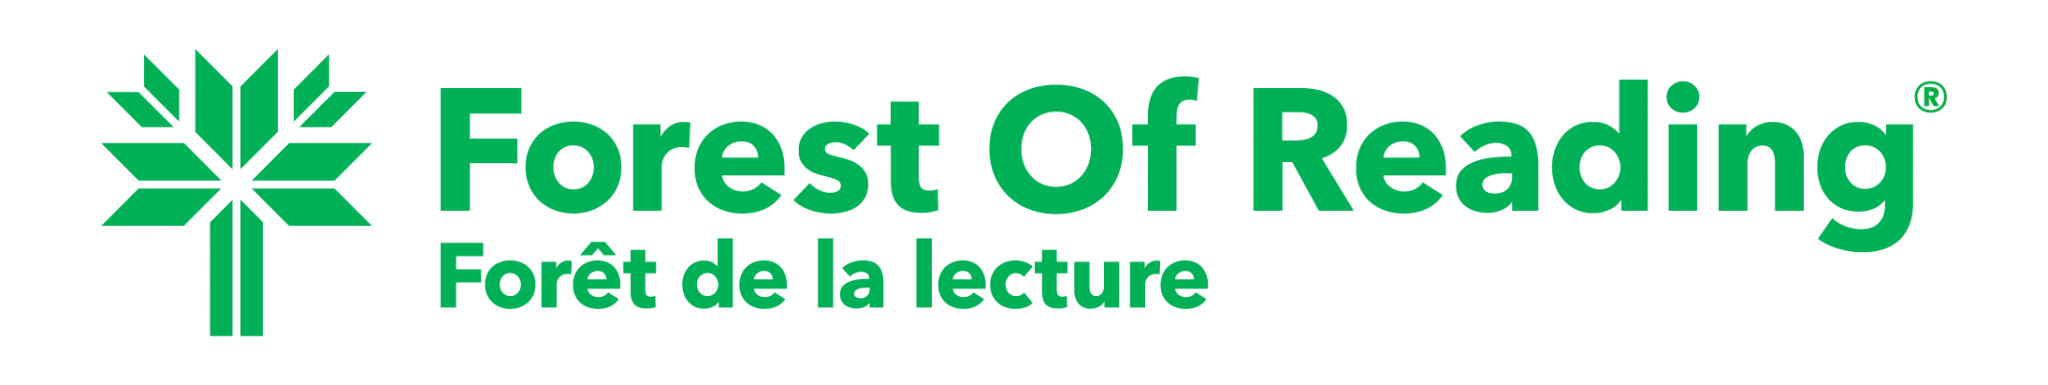 Green Forest of Reading logo